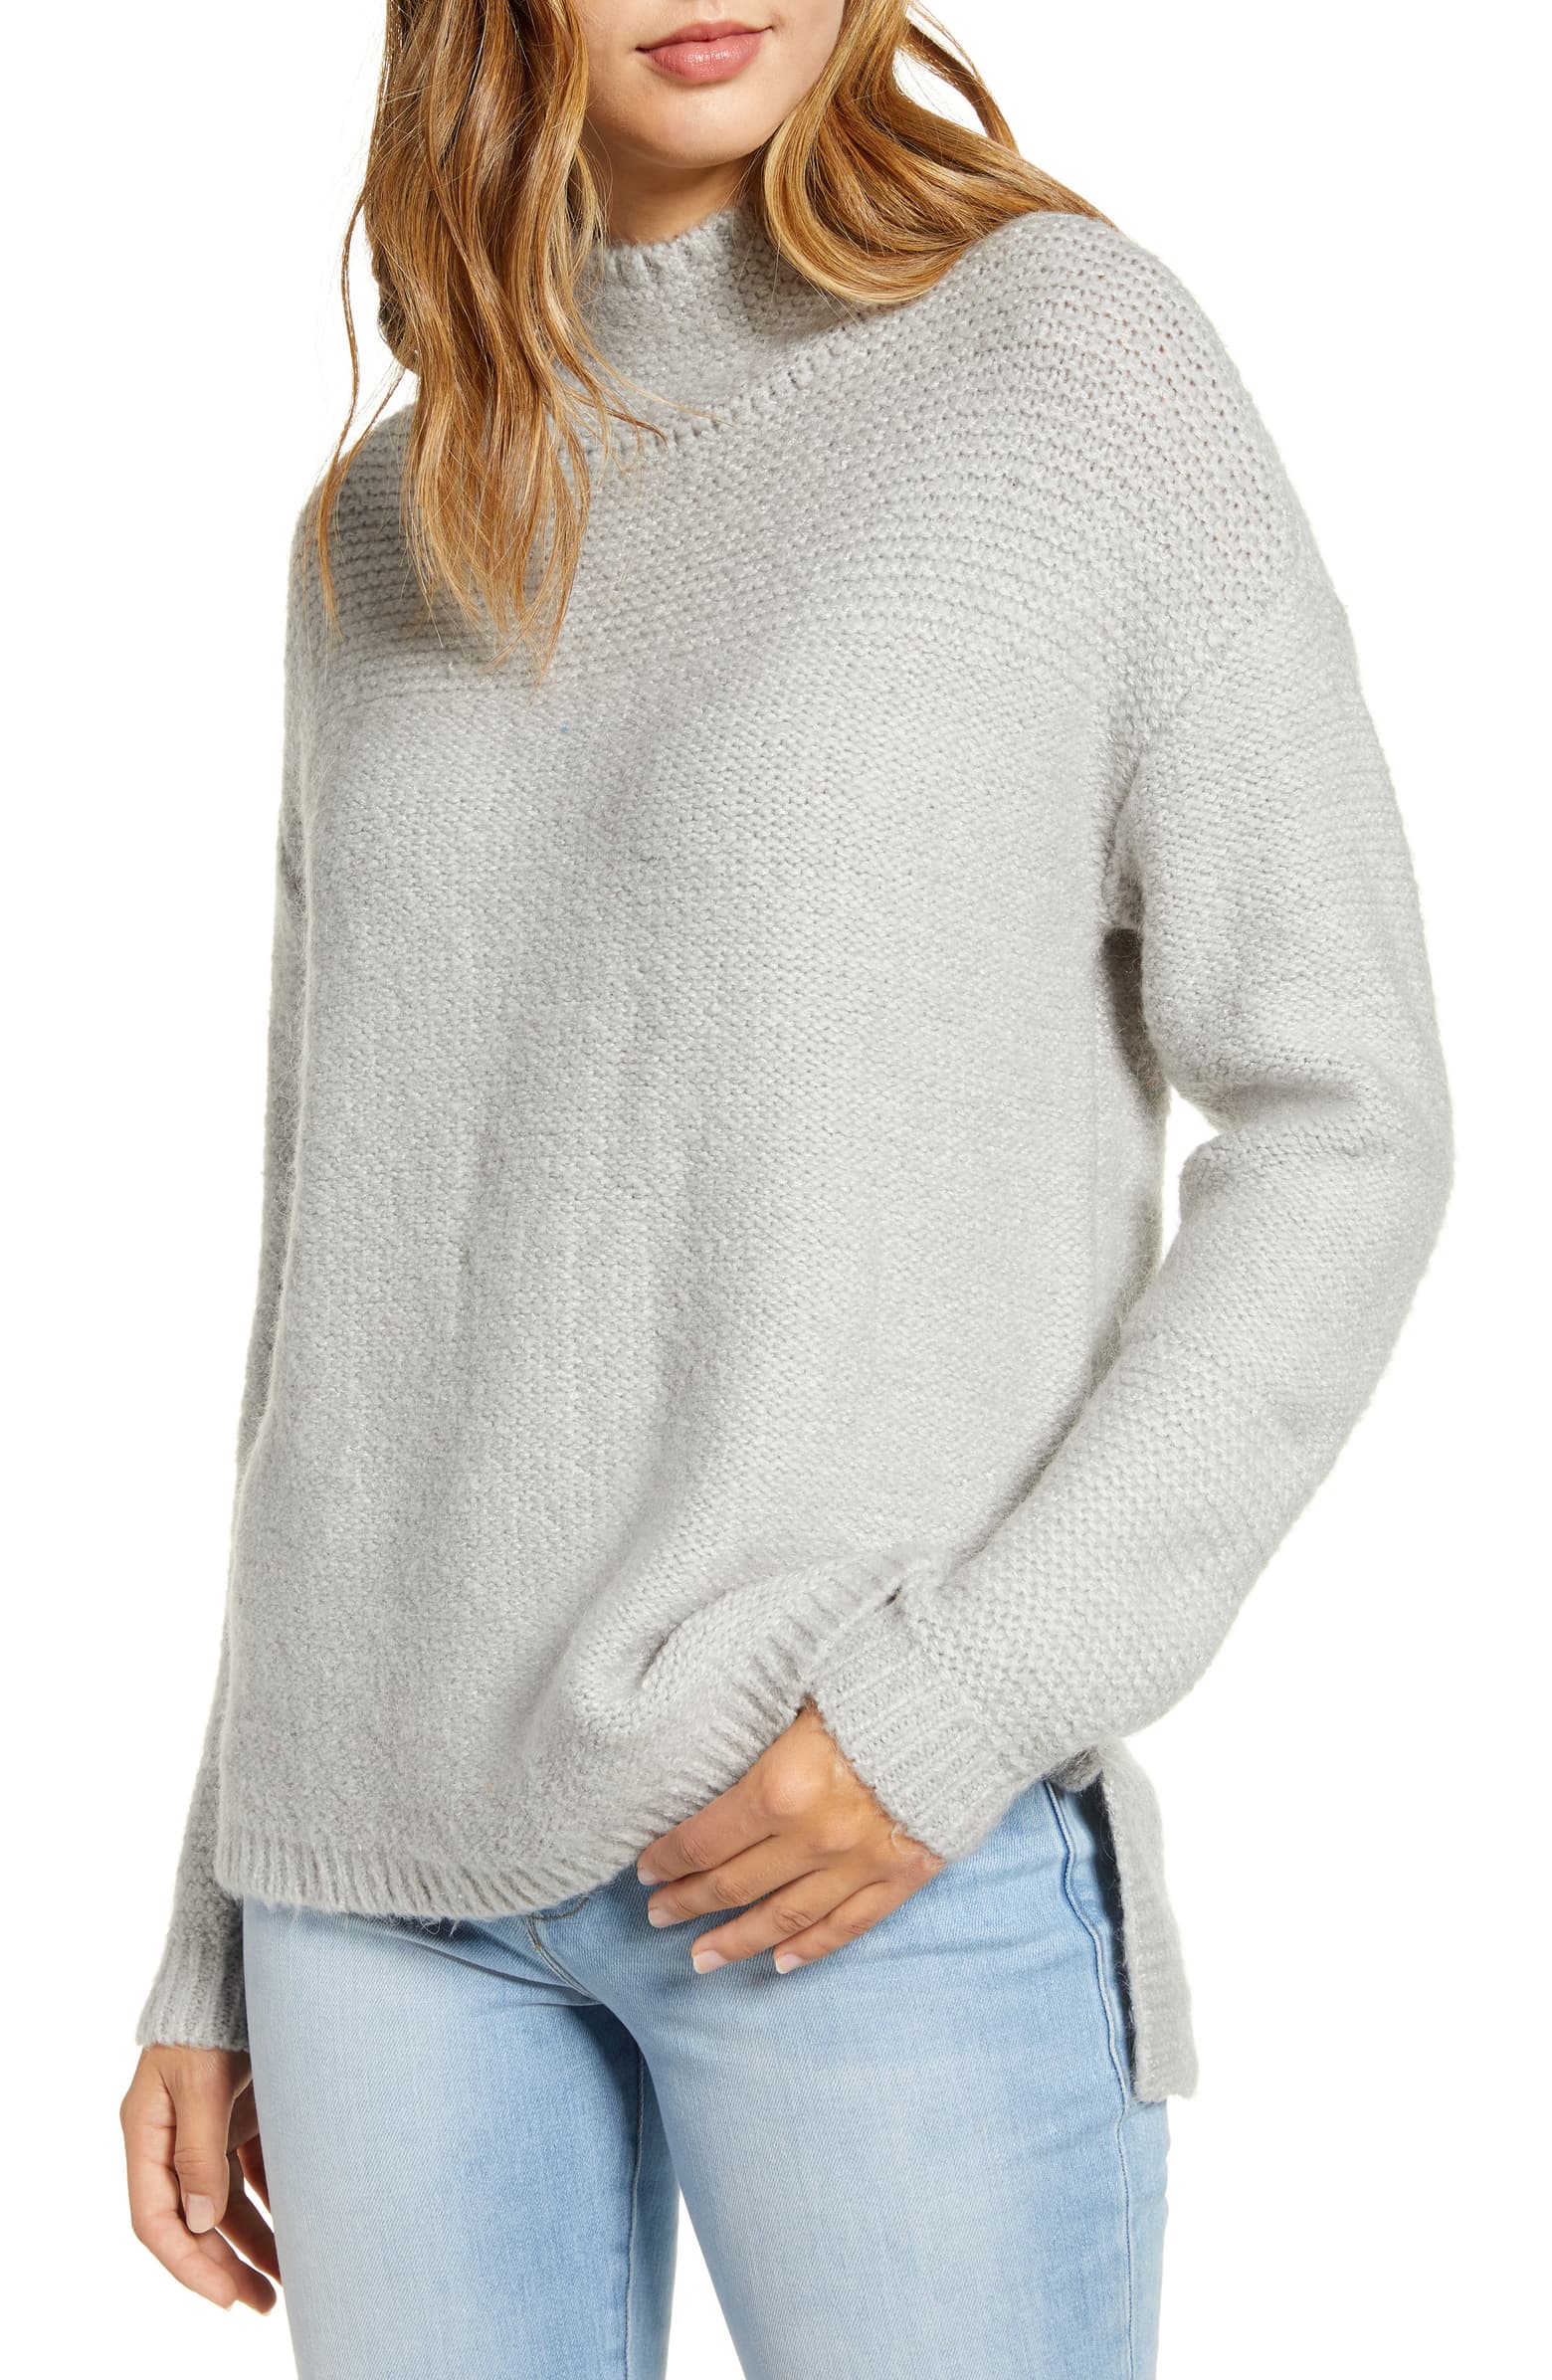 This Seriously Pretty Sweater Is Selling Fast At Nordstrom–Get It On ...